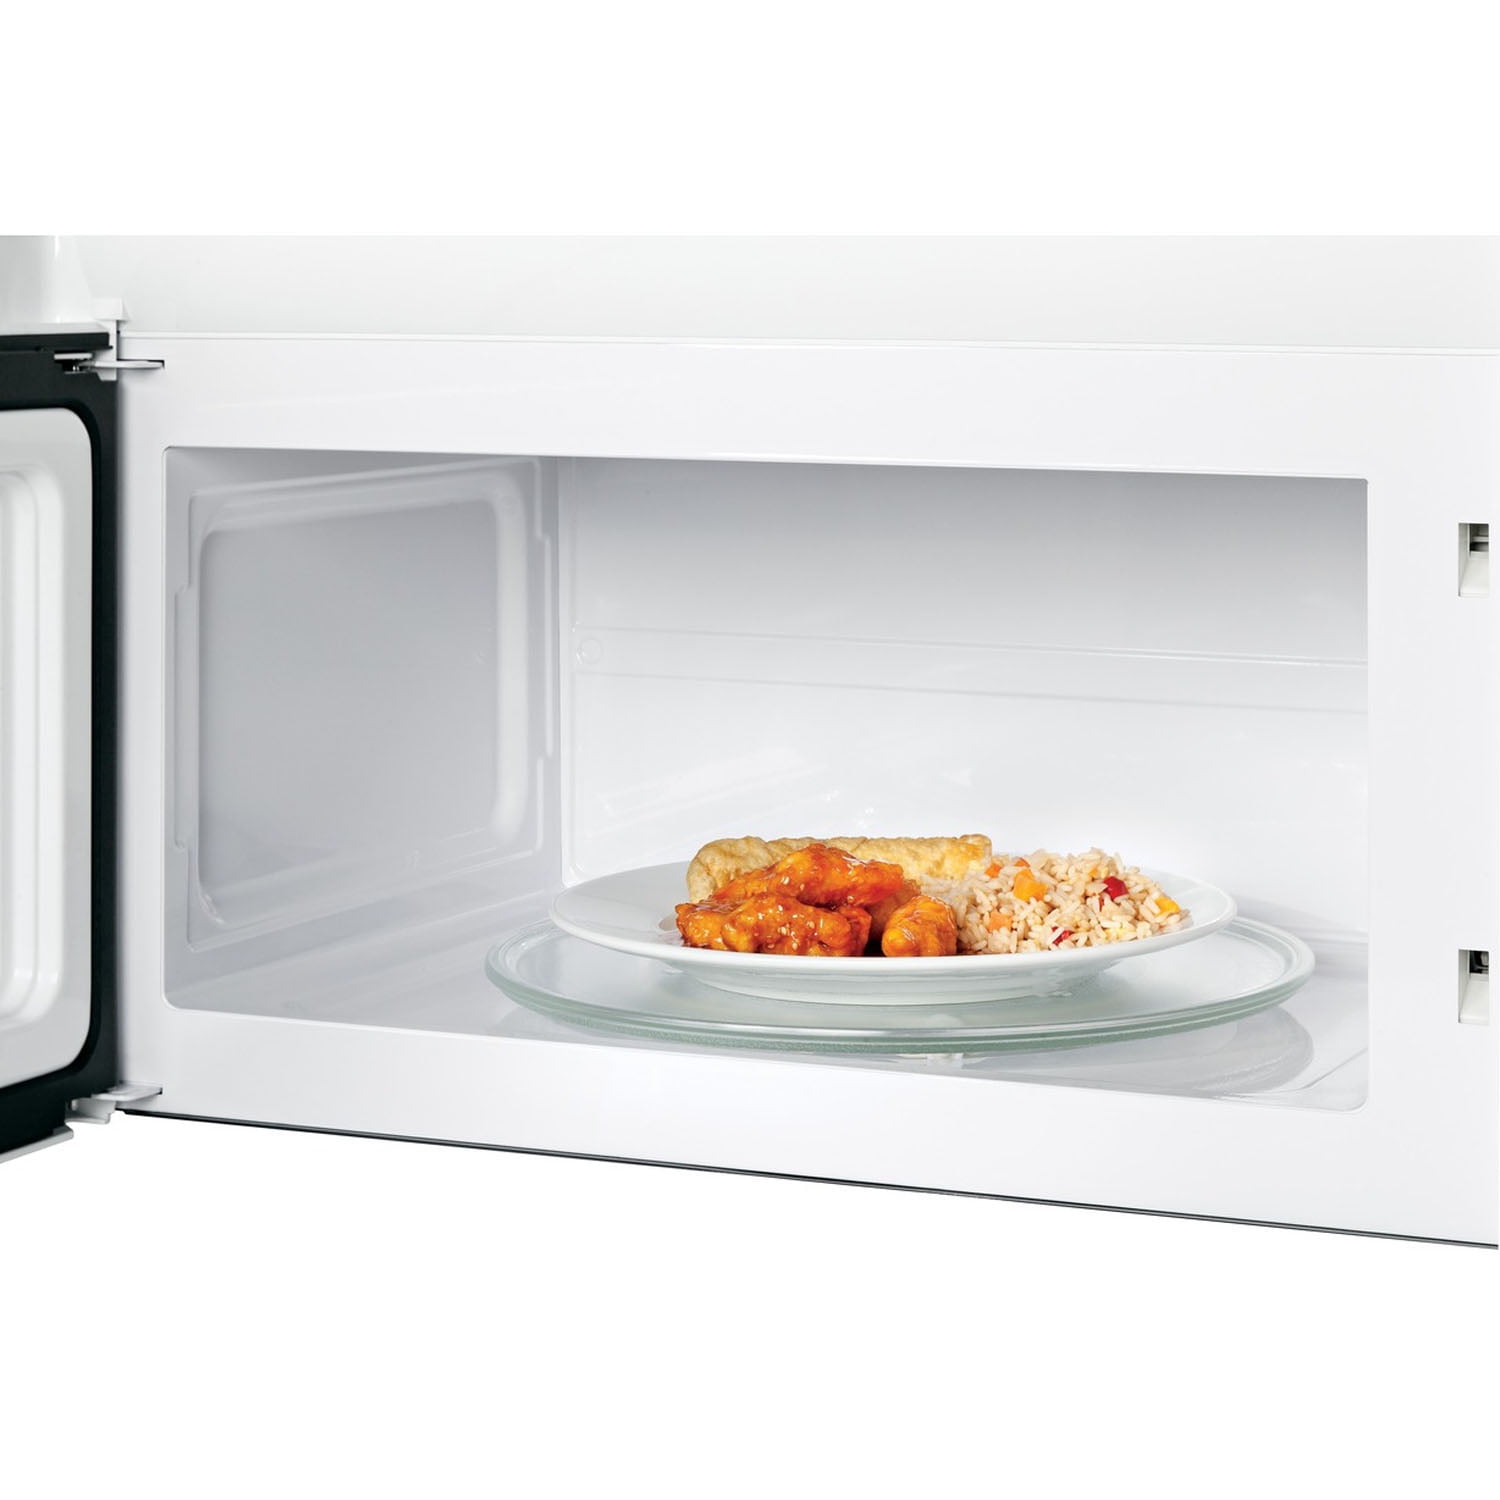 Ge 1.6 Cu. Ft. Over-The-Range Microwave Oven, Bisque, 1000 Watts